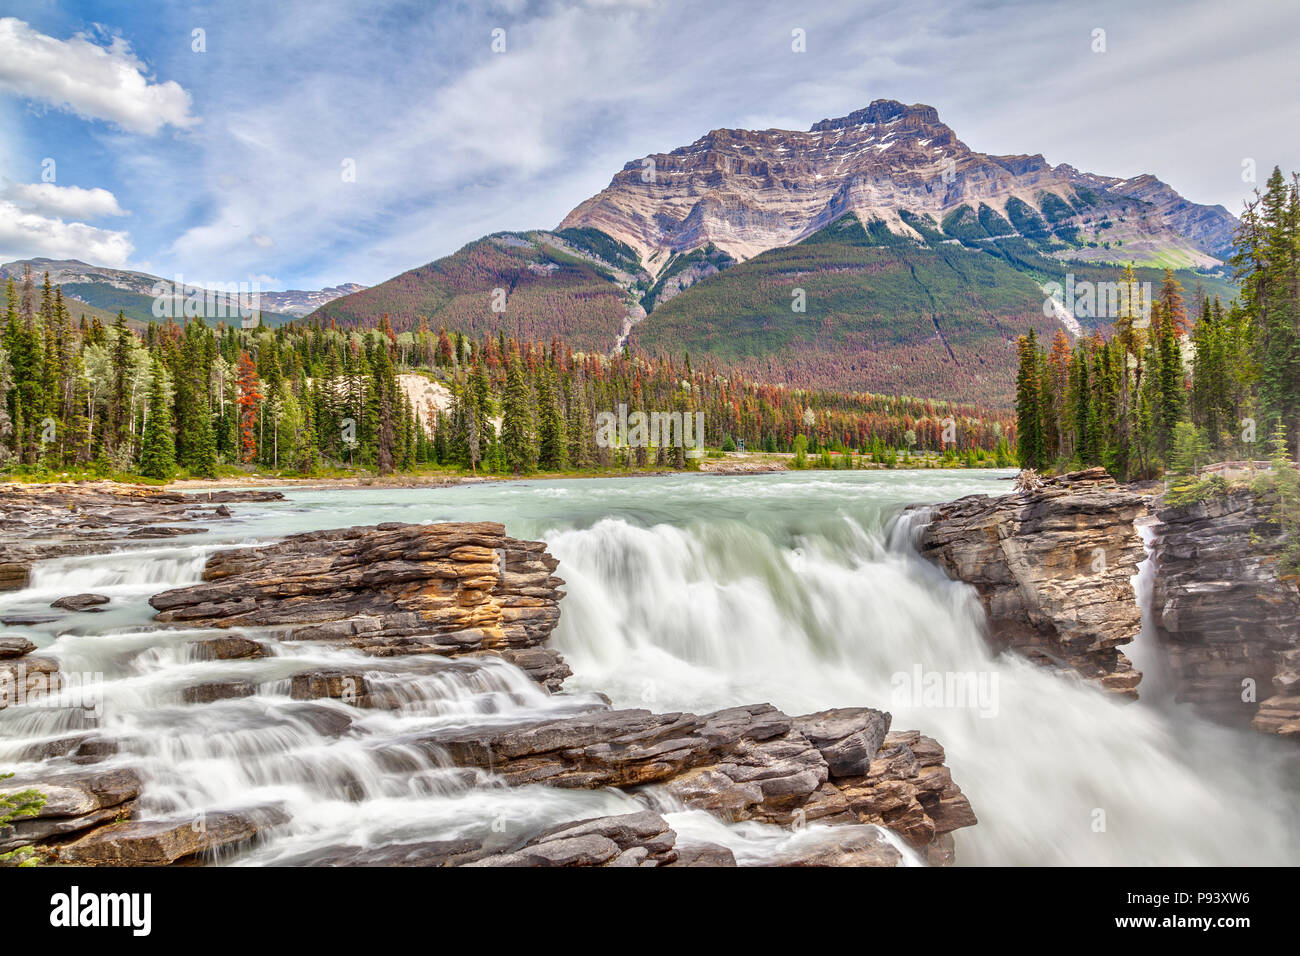 Athabasca Falls in Jasper National Park on the Icefields Parkway in Alberta, Canada, with Mount Kerkeslin in the background. A Class 5 waterfall, it i Stock Photo